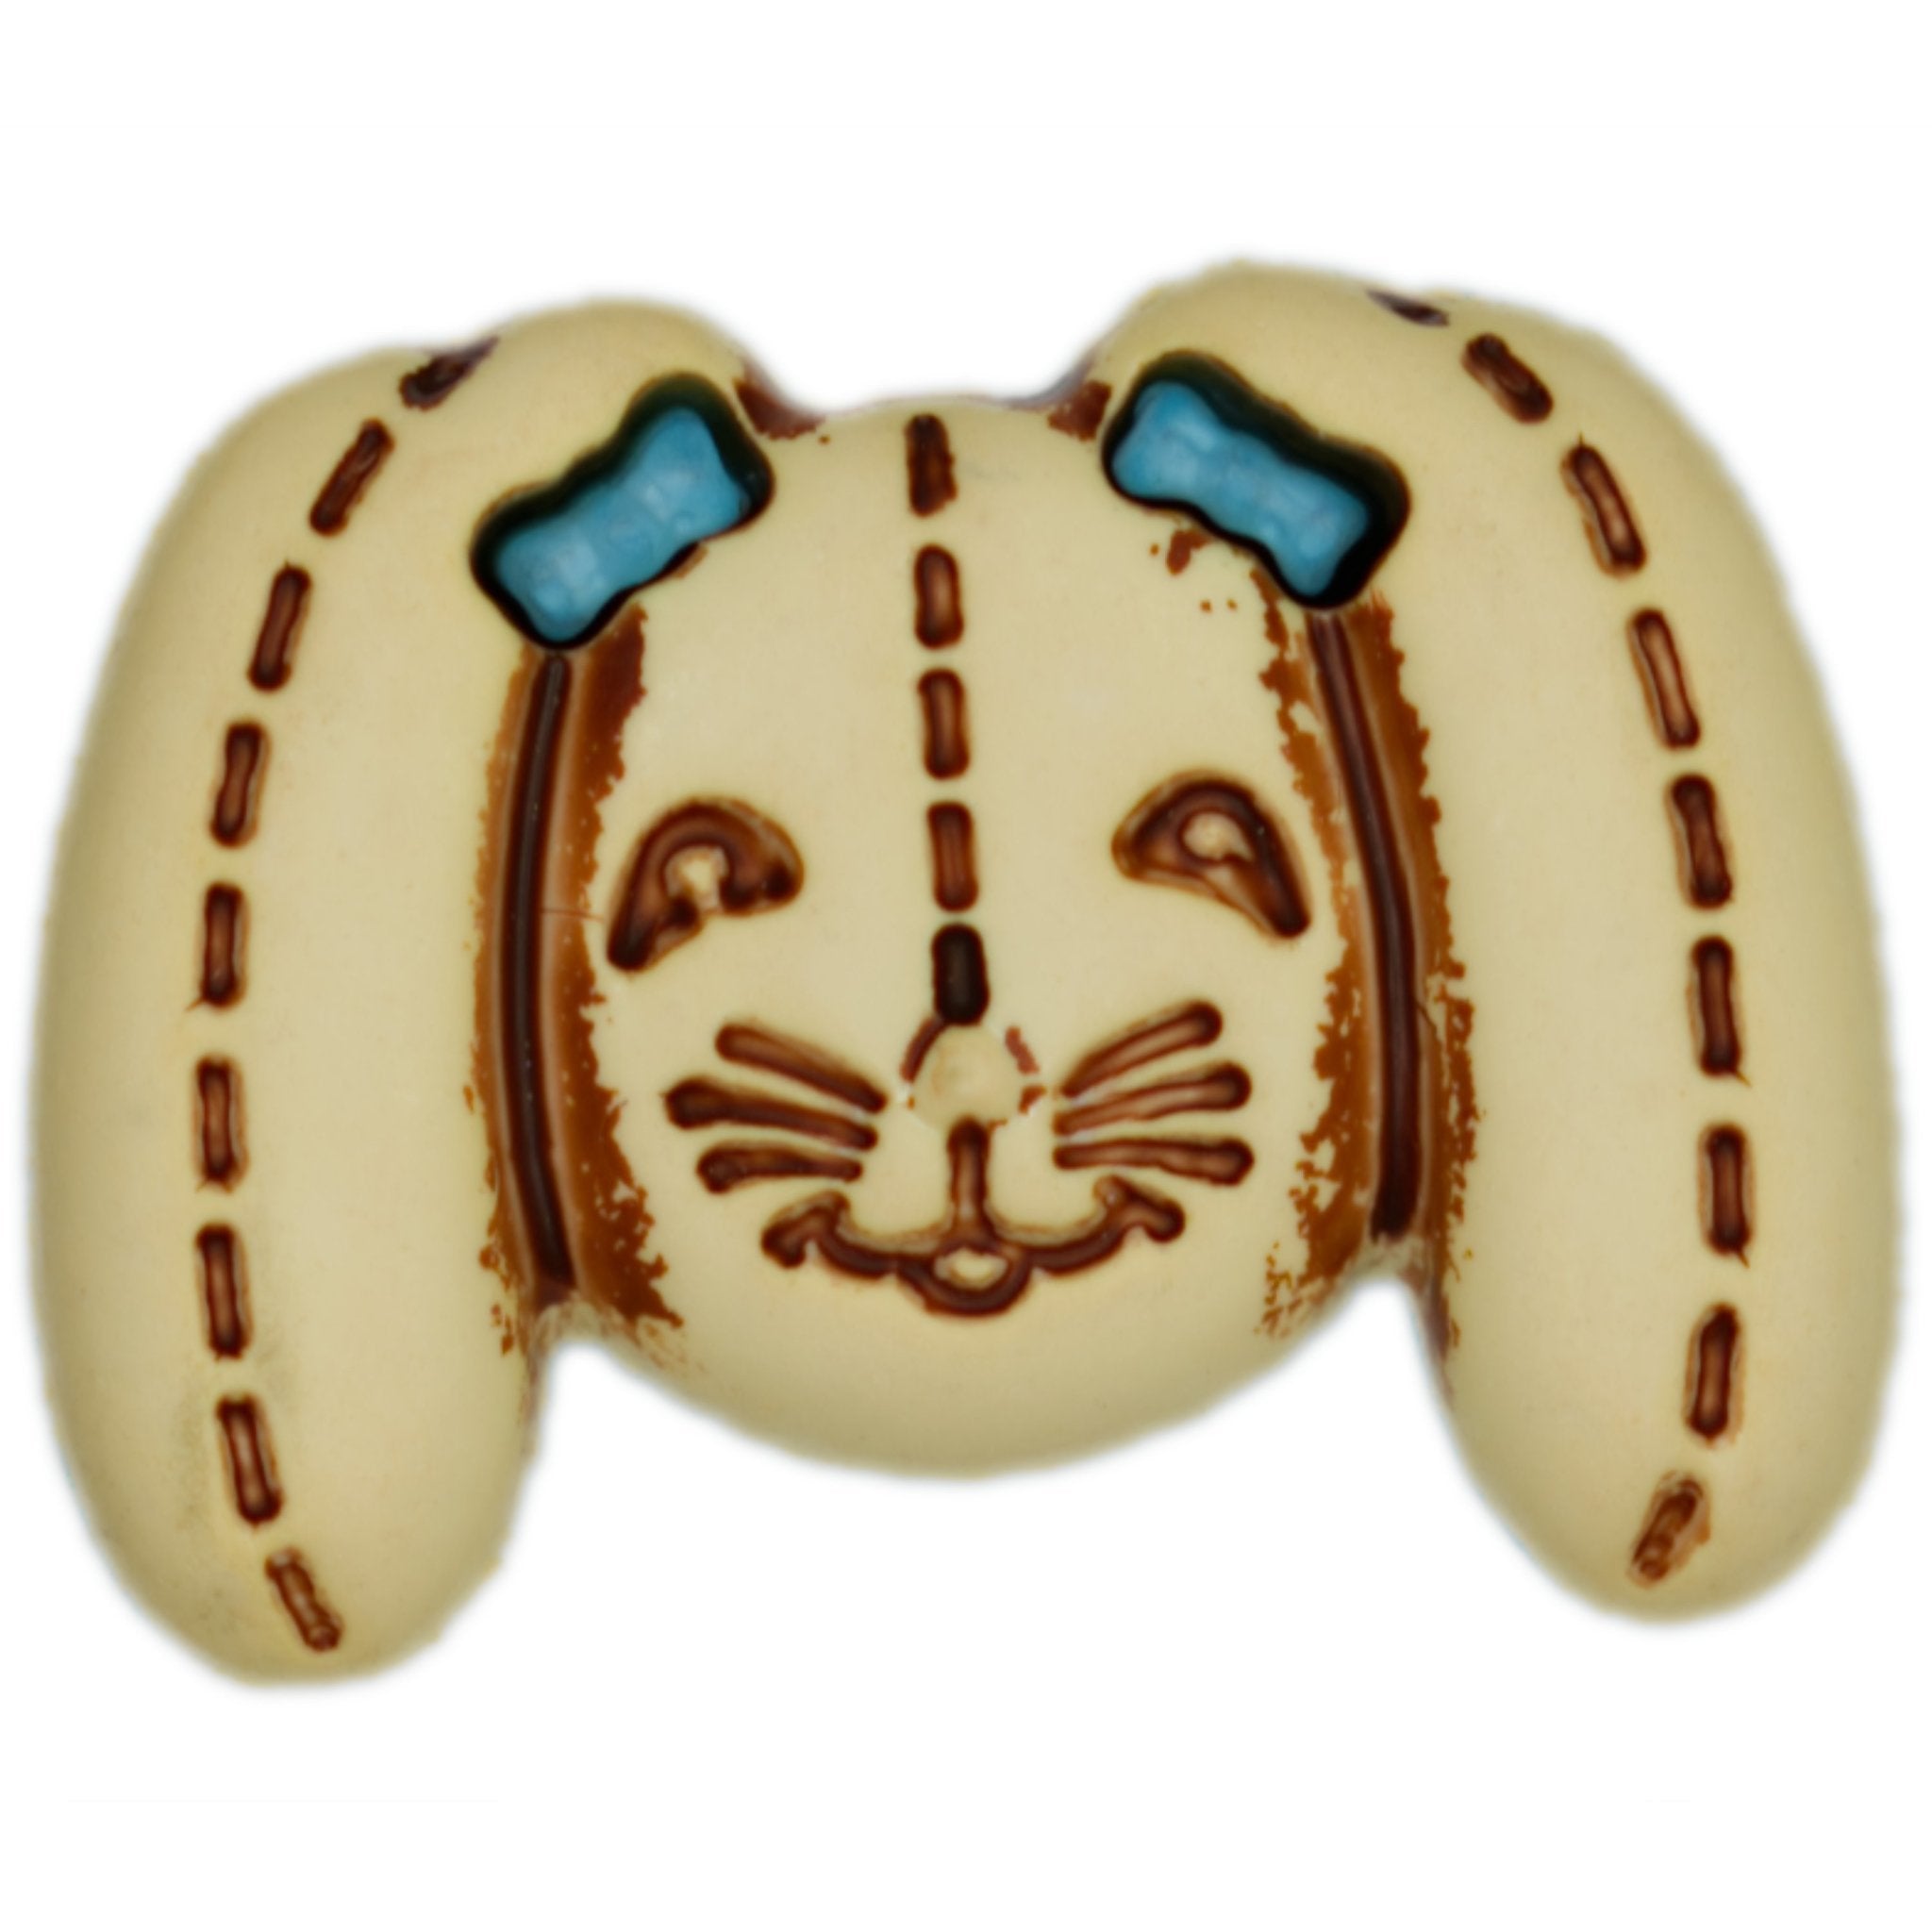 Bunny Rabbit Button - Buttons Galore and More